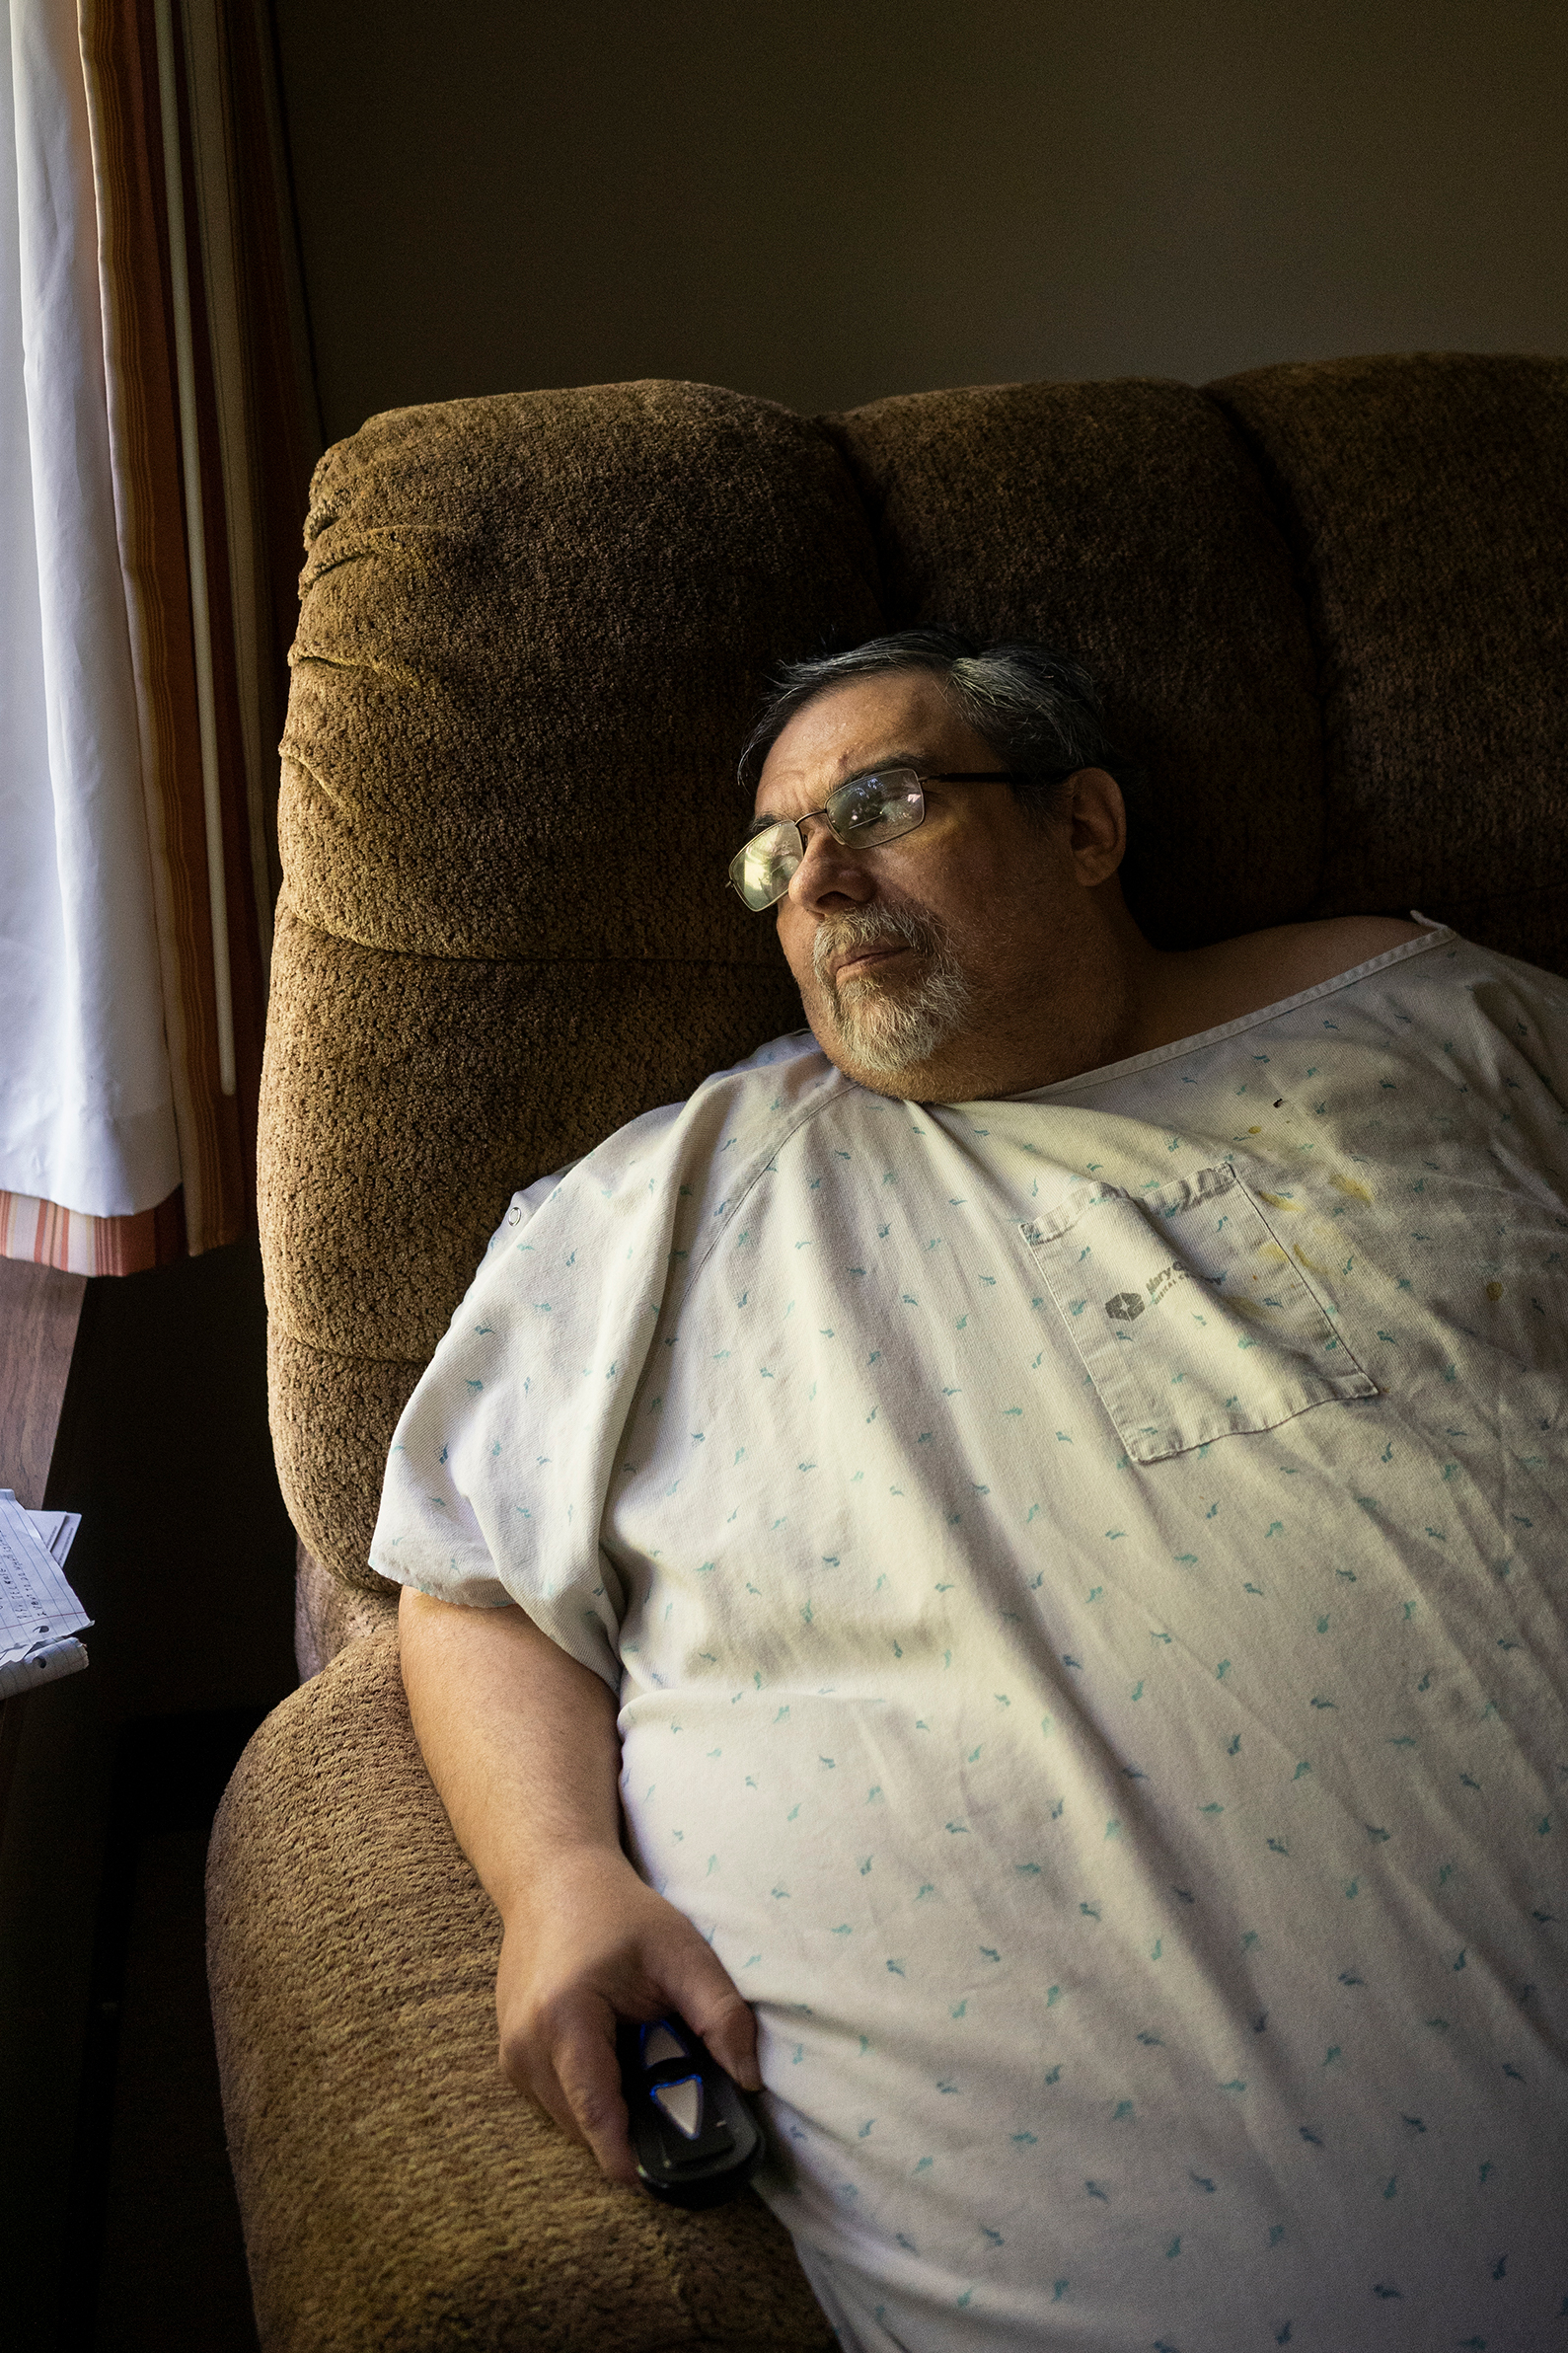 A photo shows Jeff White looking out a window inside of the nursing home where he lives.